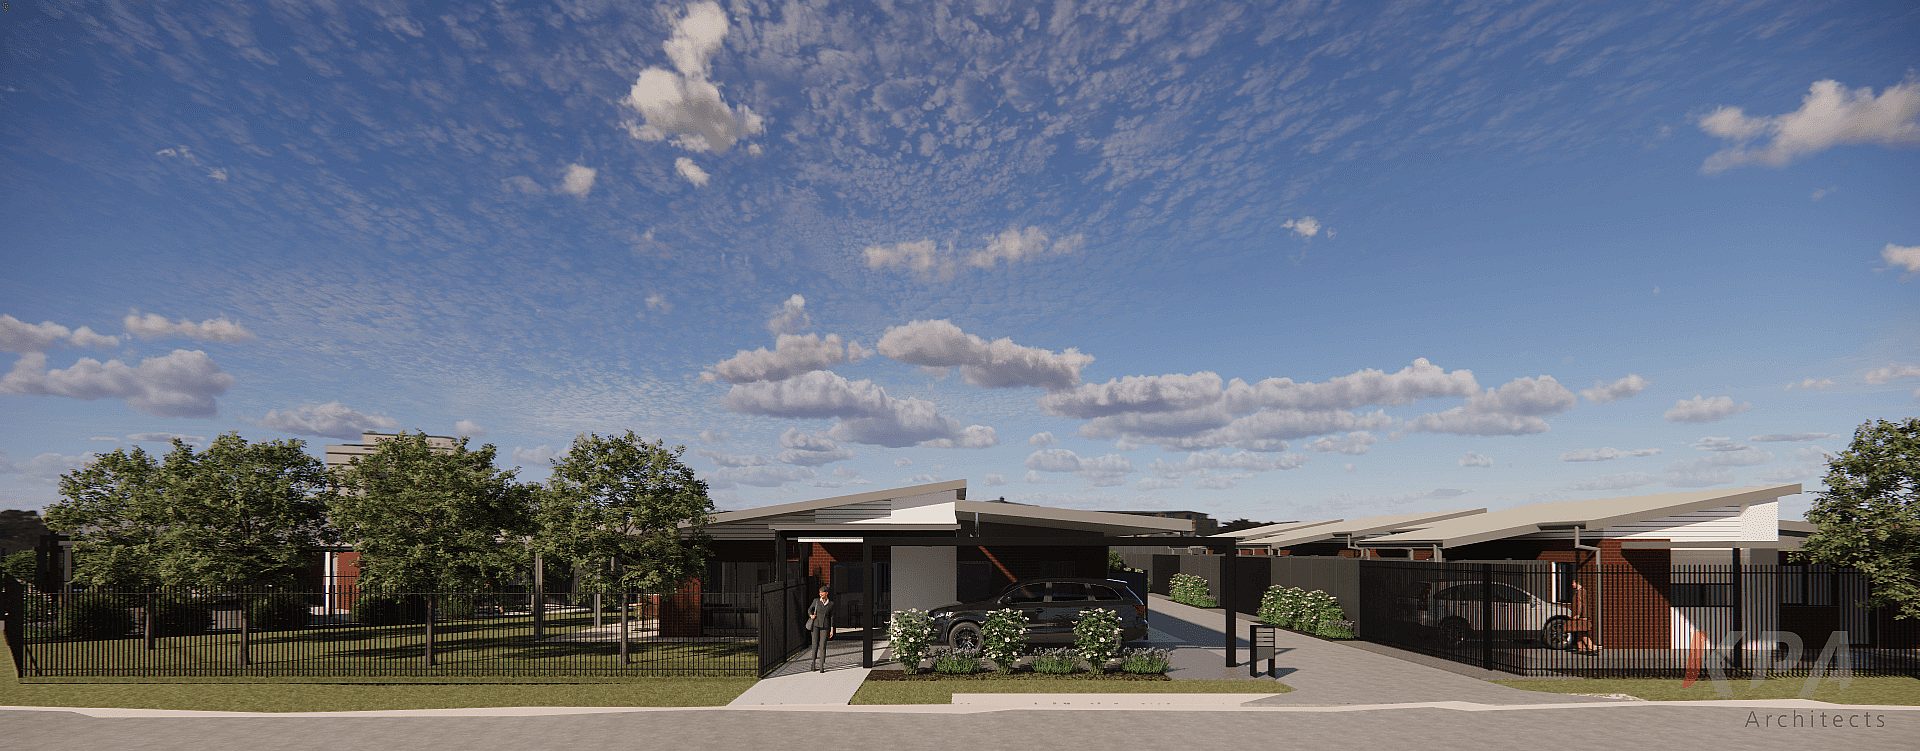 A render of the Whiting Armadale property.